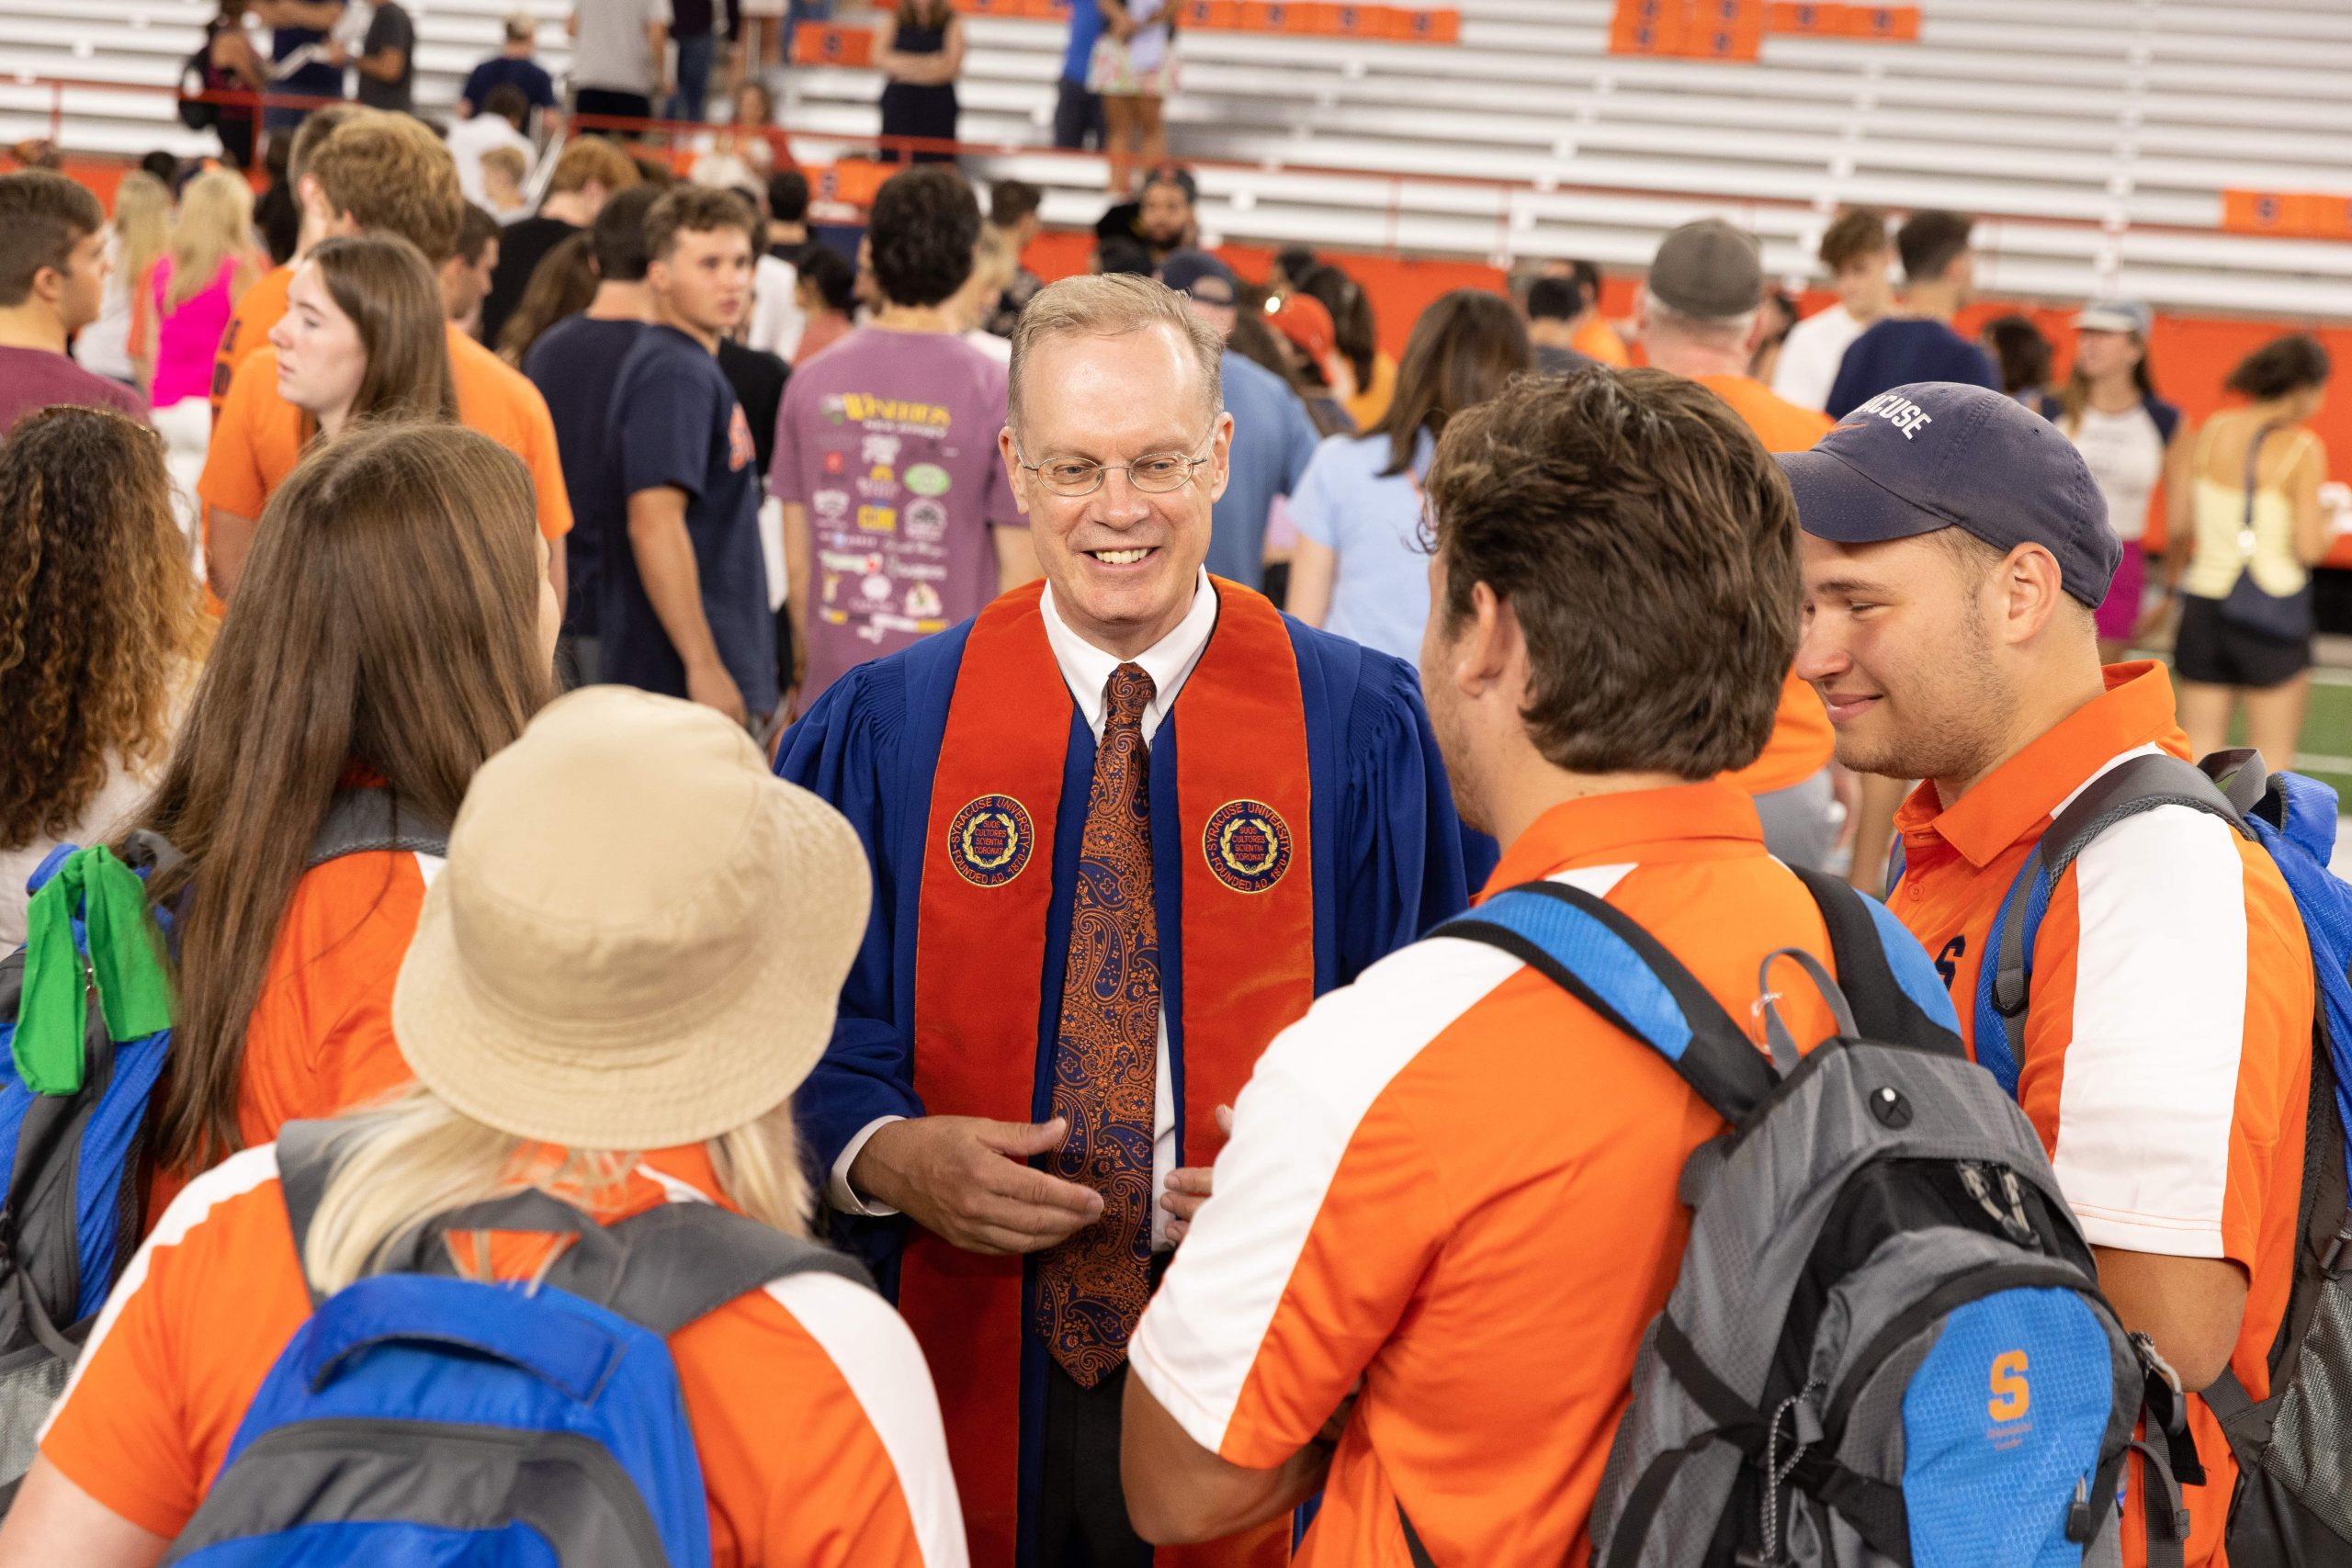 Chancellor Kent Syverud mingles with a group of students in the JMA Wireless Dome during New Student Convocation